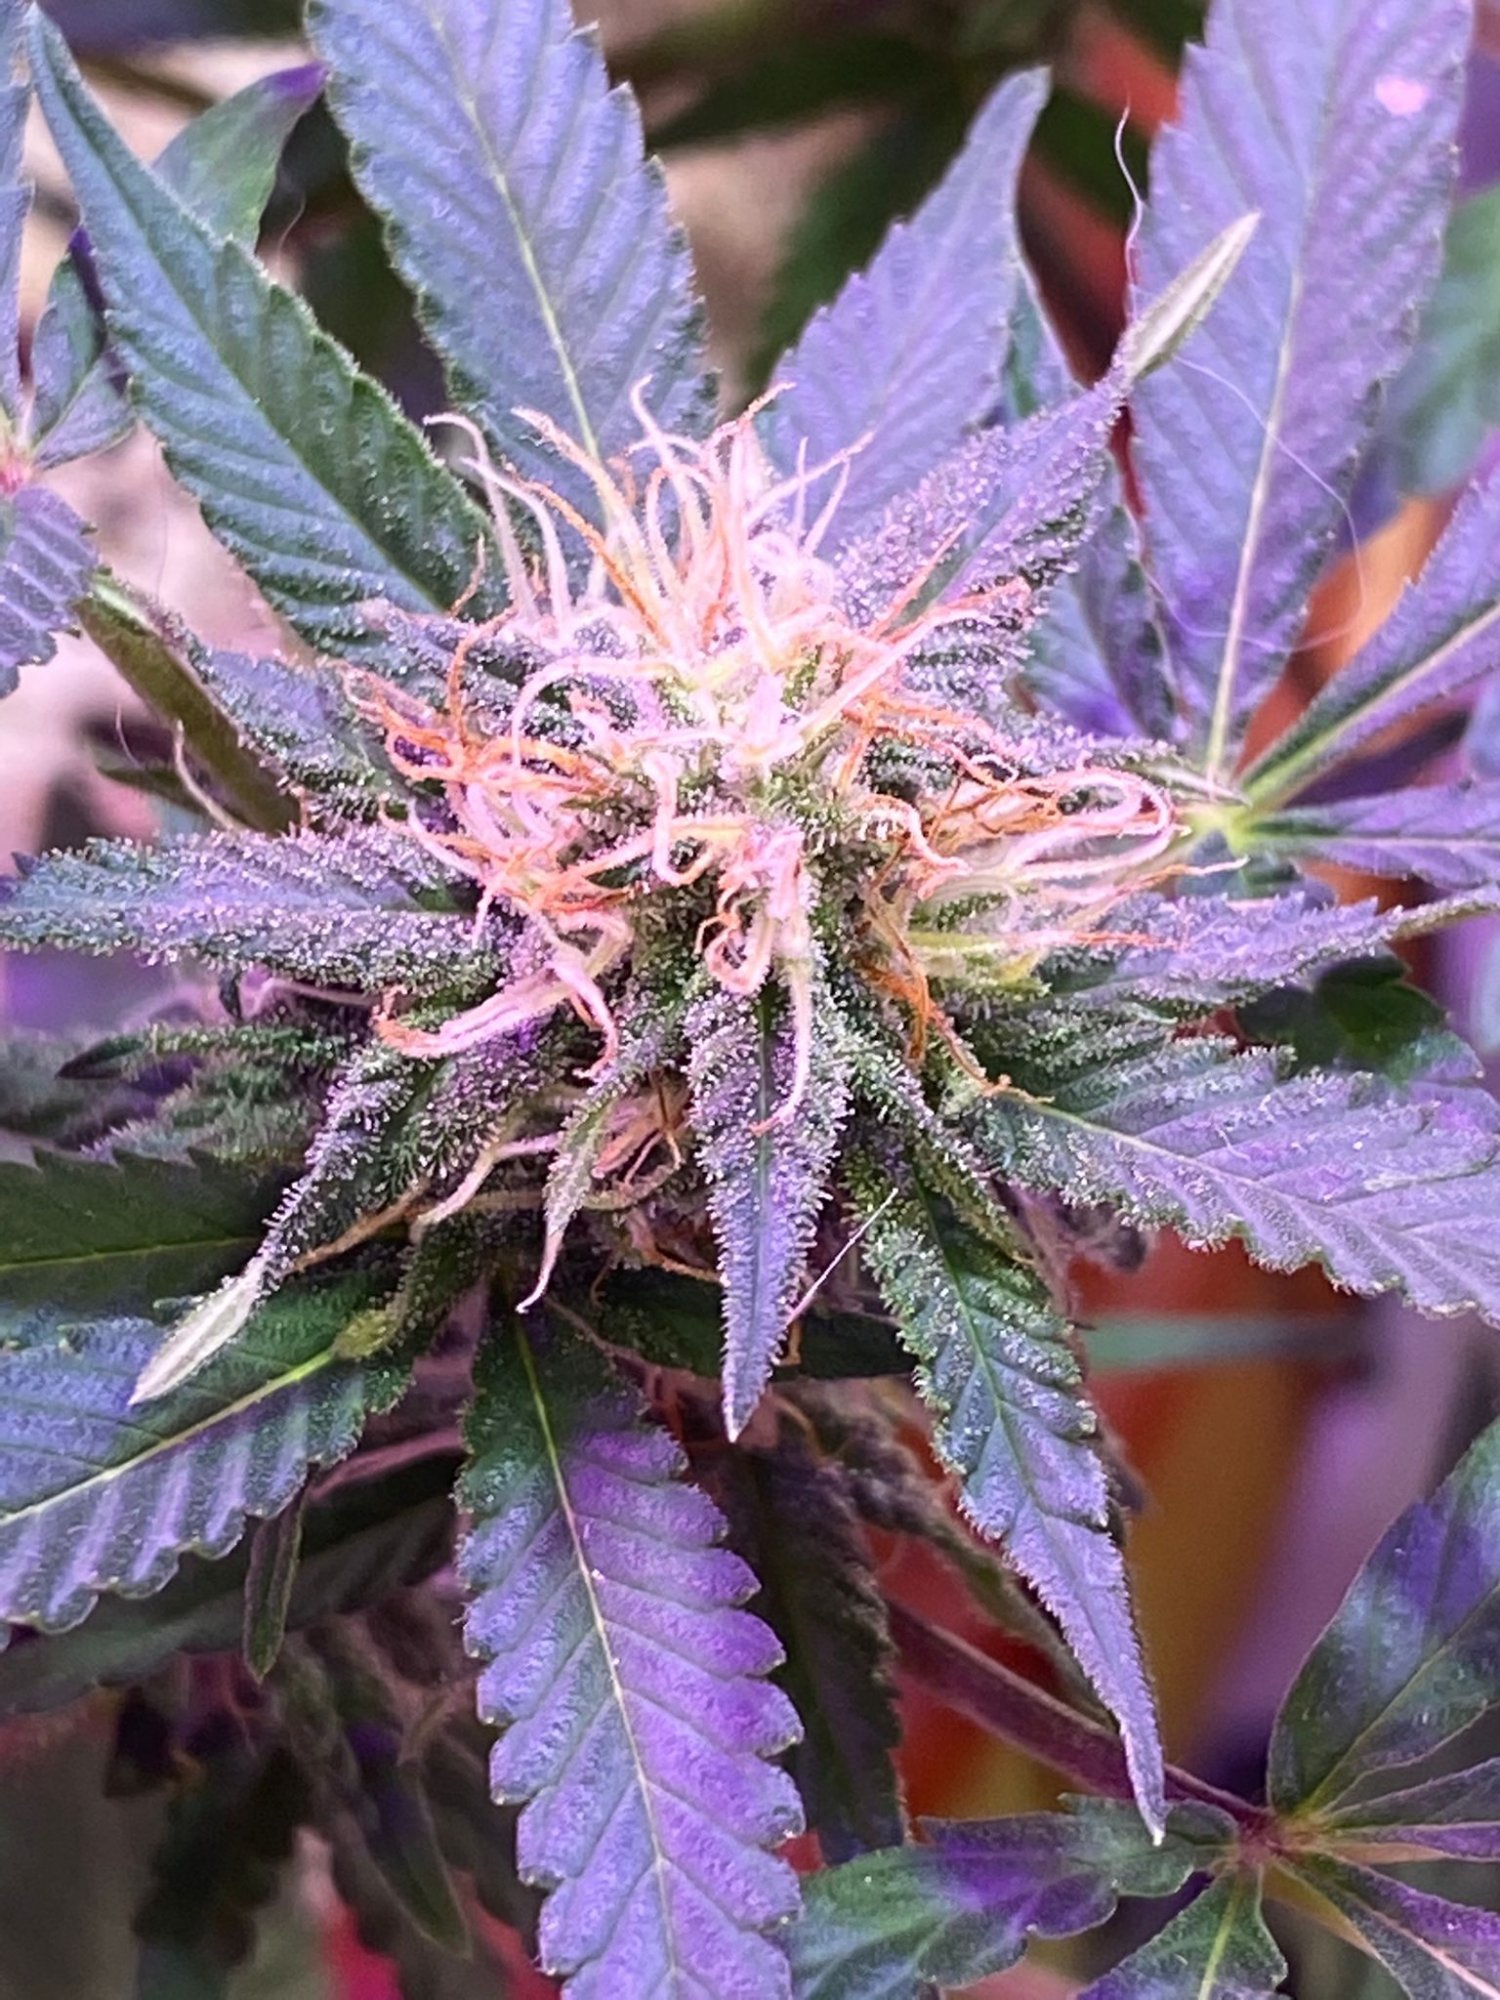 Mid flowering brown pistils and ppm clarifications 3